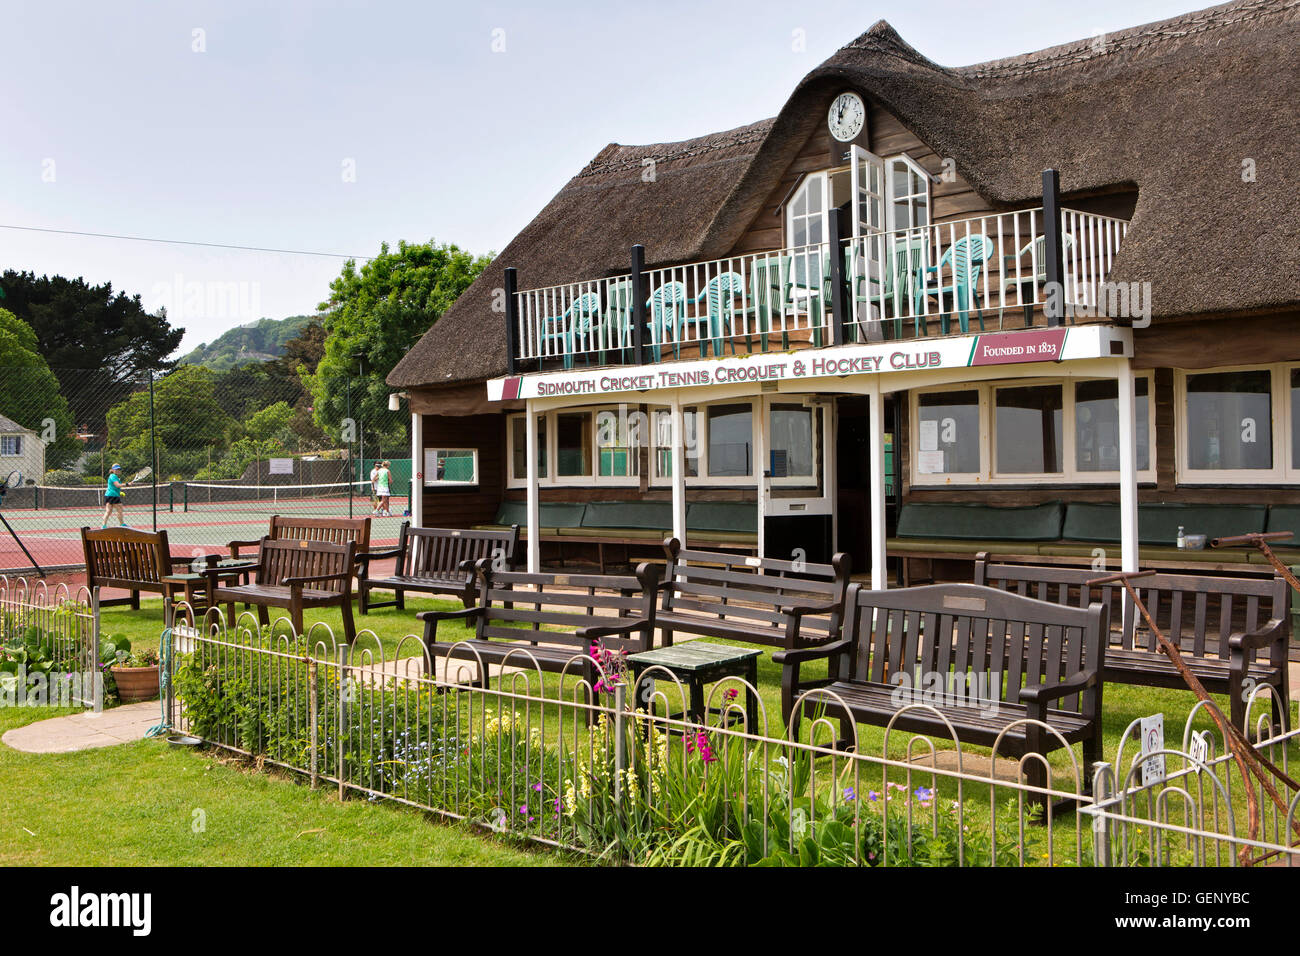 UK, England, Devon, Sidmouth, Fortfield, Thatched pavillion of Sidmouth Cricket, Tennis, Croquet & Hockey Club Stock Photo